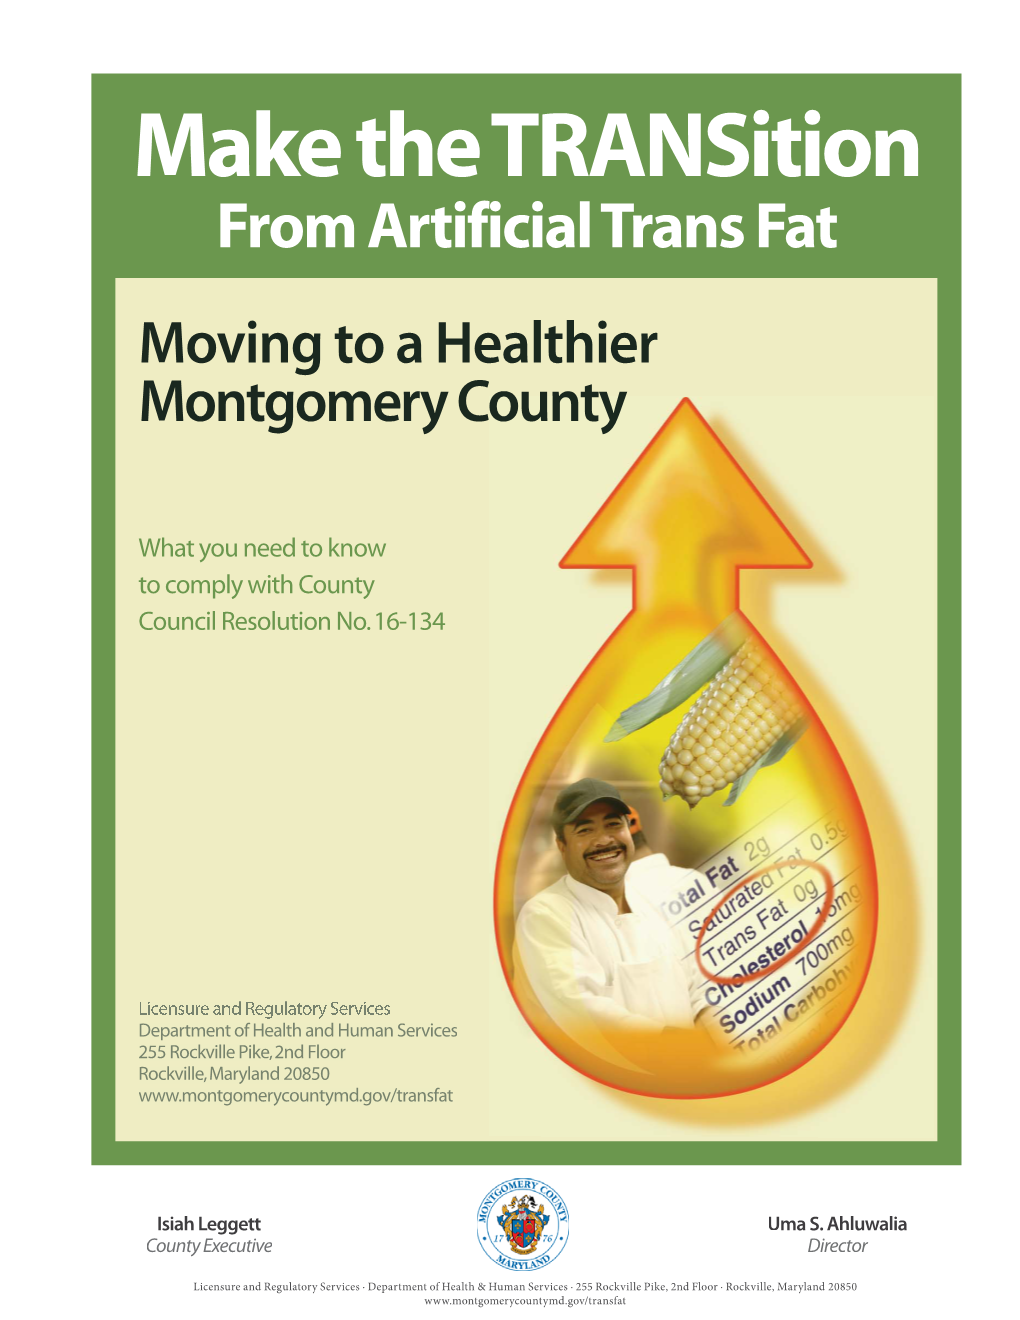 Trans Fat Facts